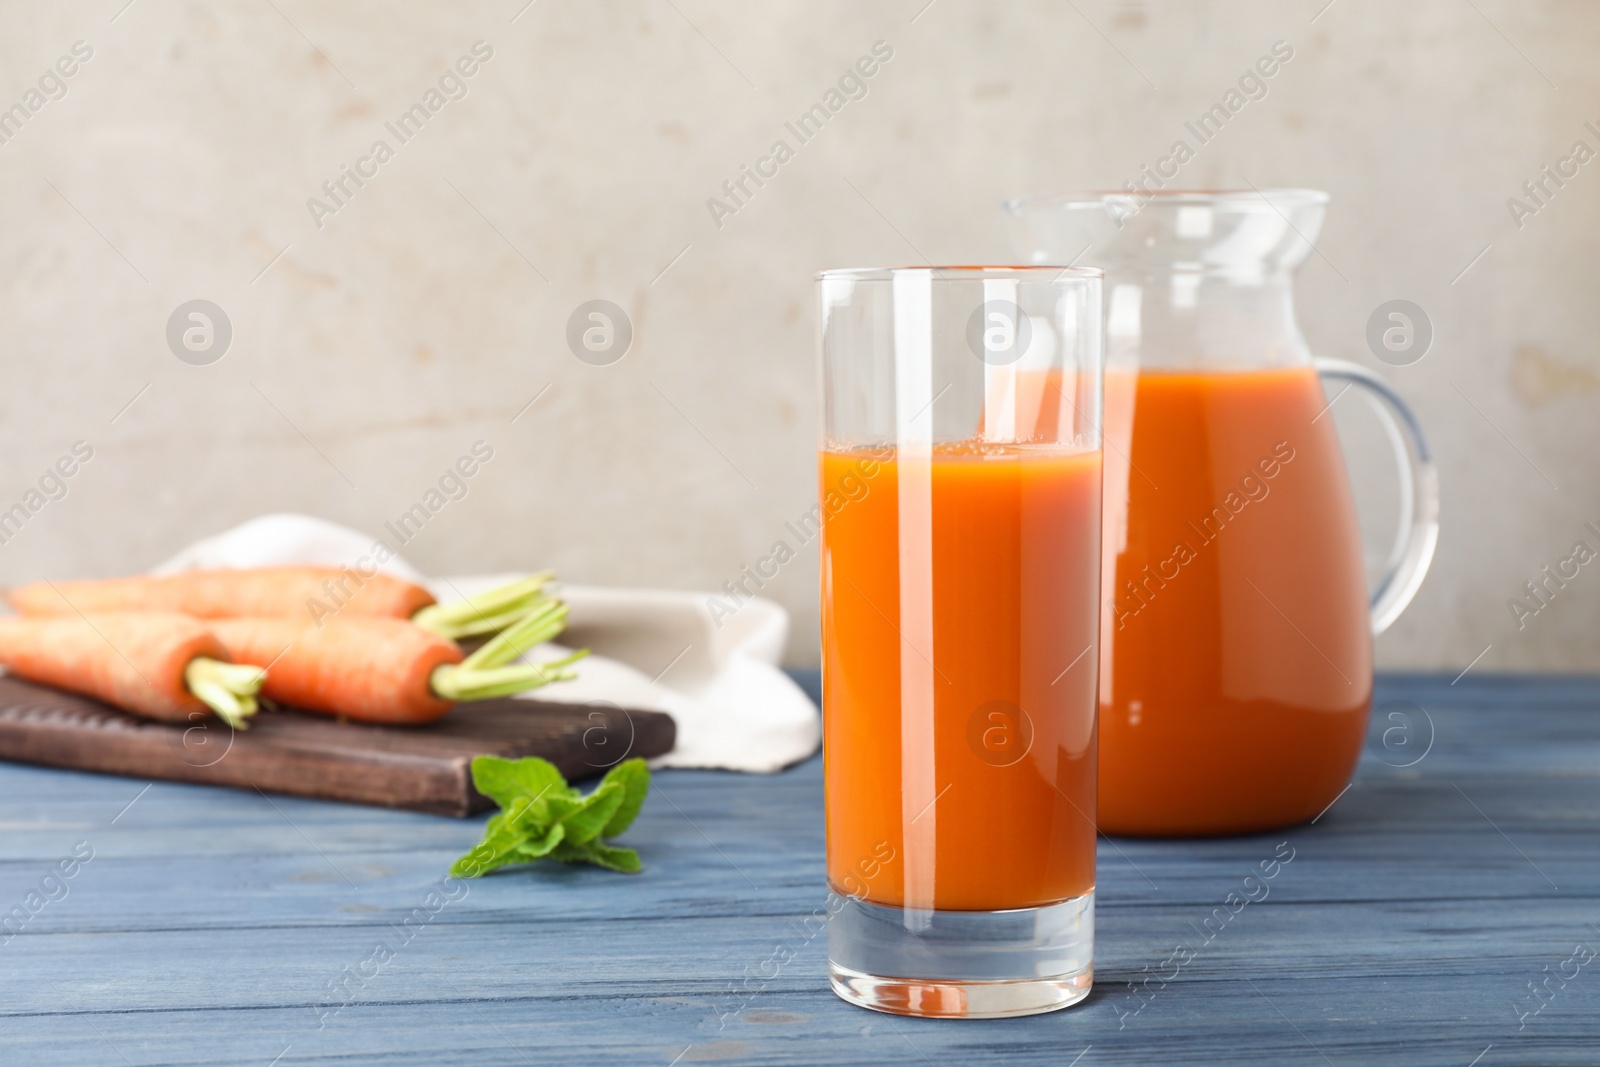 Photo of Glass and jug of carrot drink on table against light background, space for text